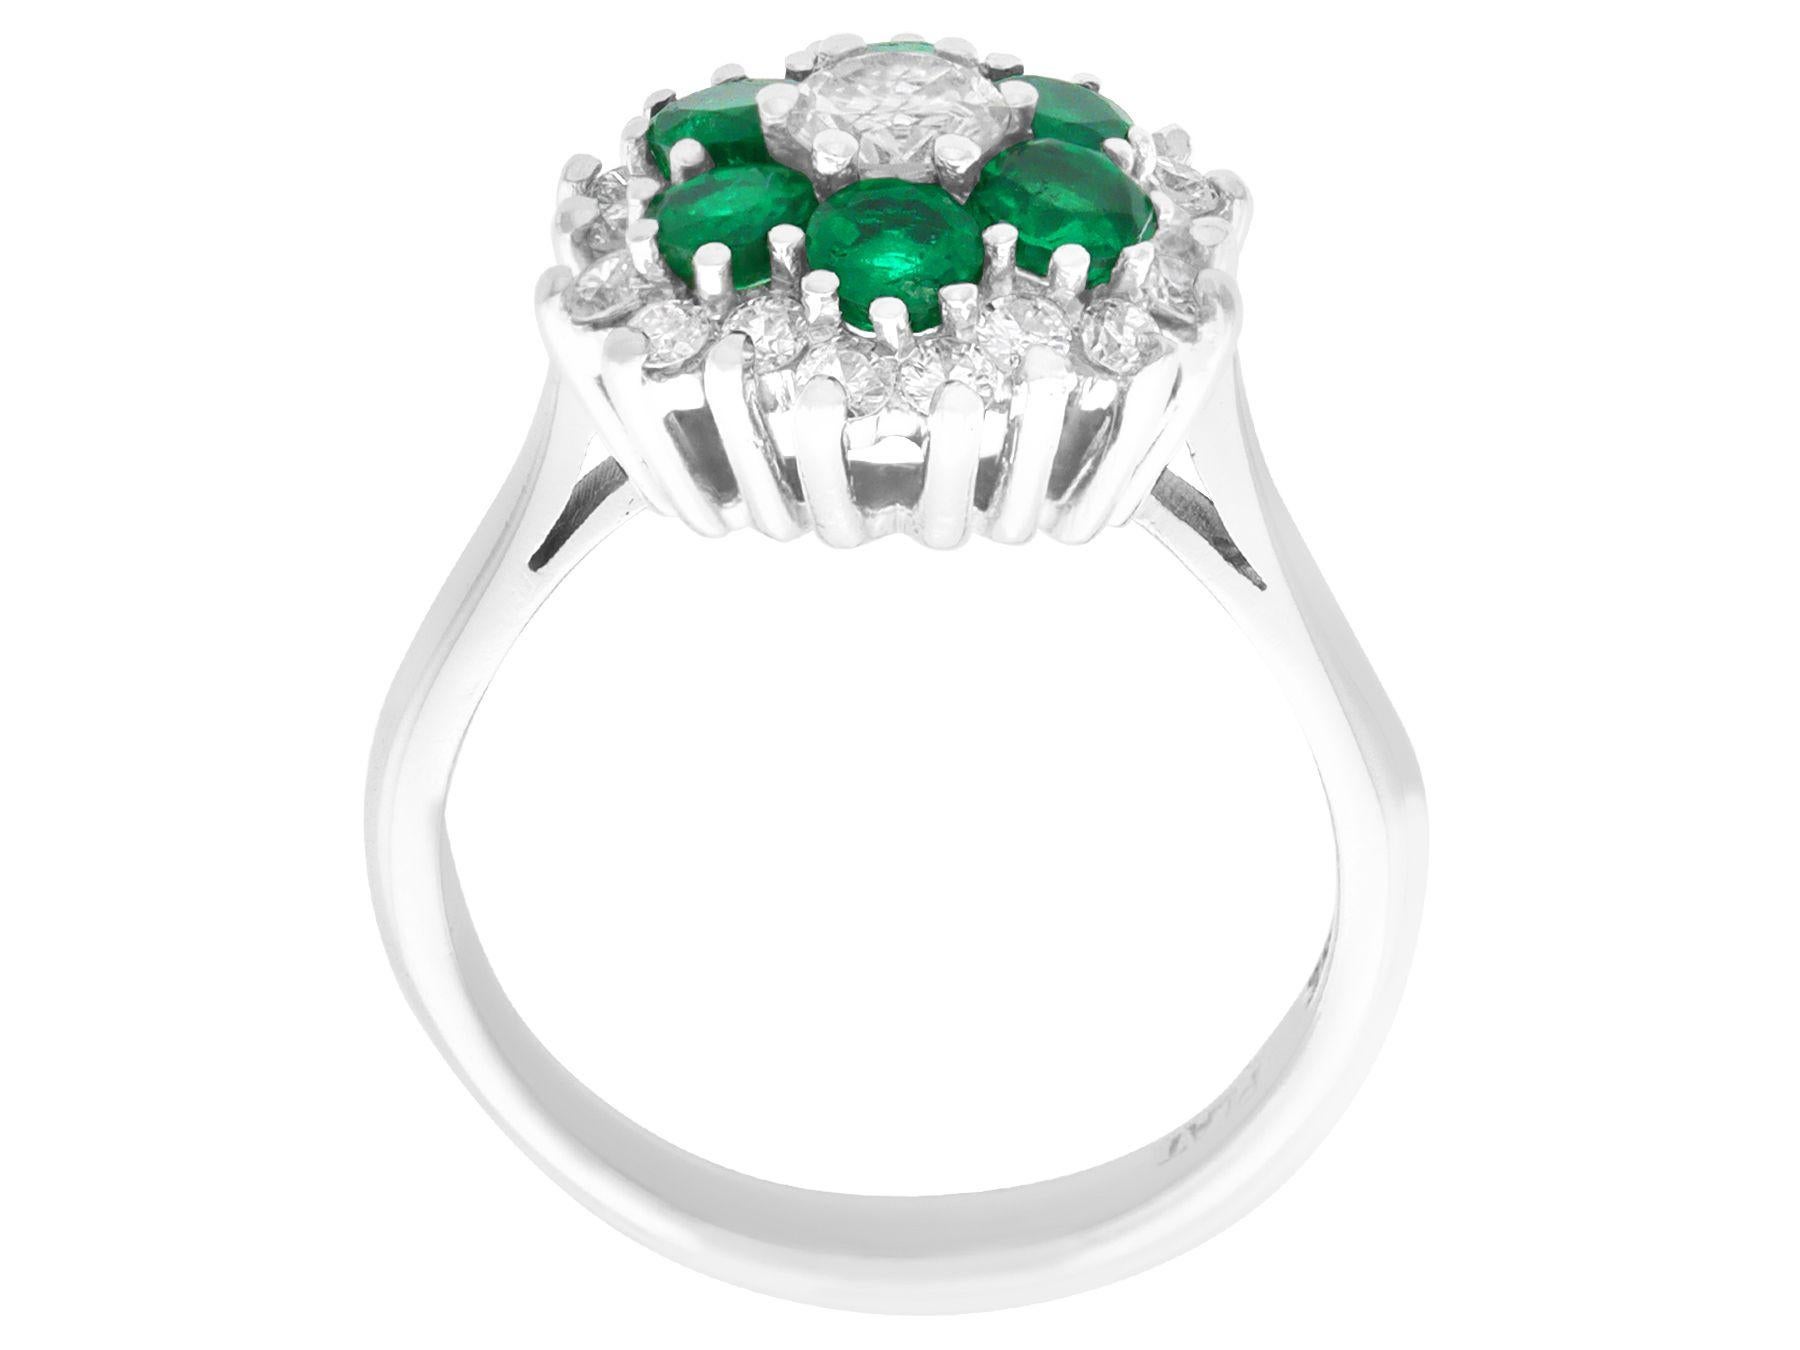 Vintage Diamond and 1.10 Carat Emerald 18k White Gold Dress Ring In Excellent Condition For Sale In Jesmond, Newcastle Upon Tyne